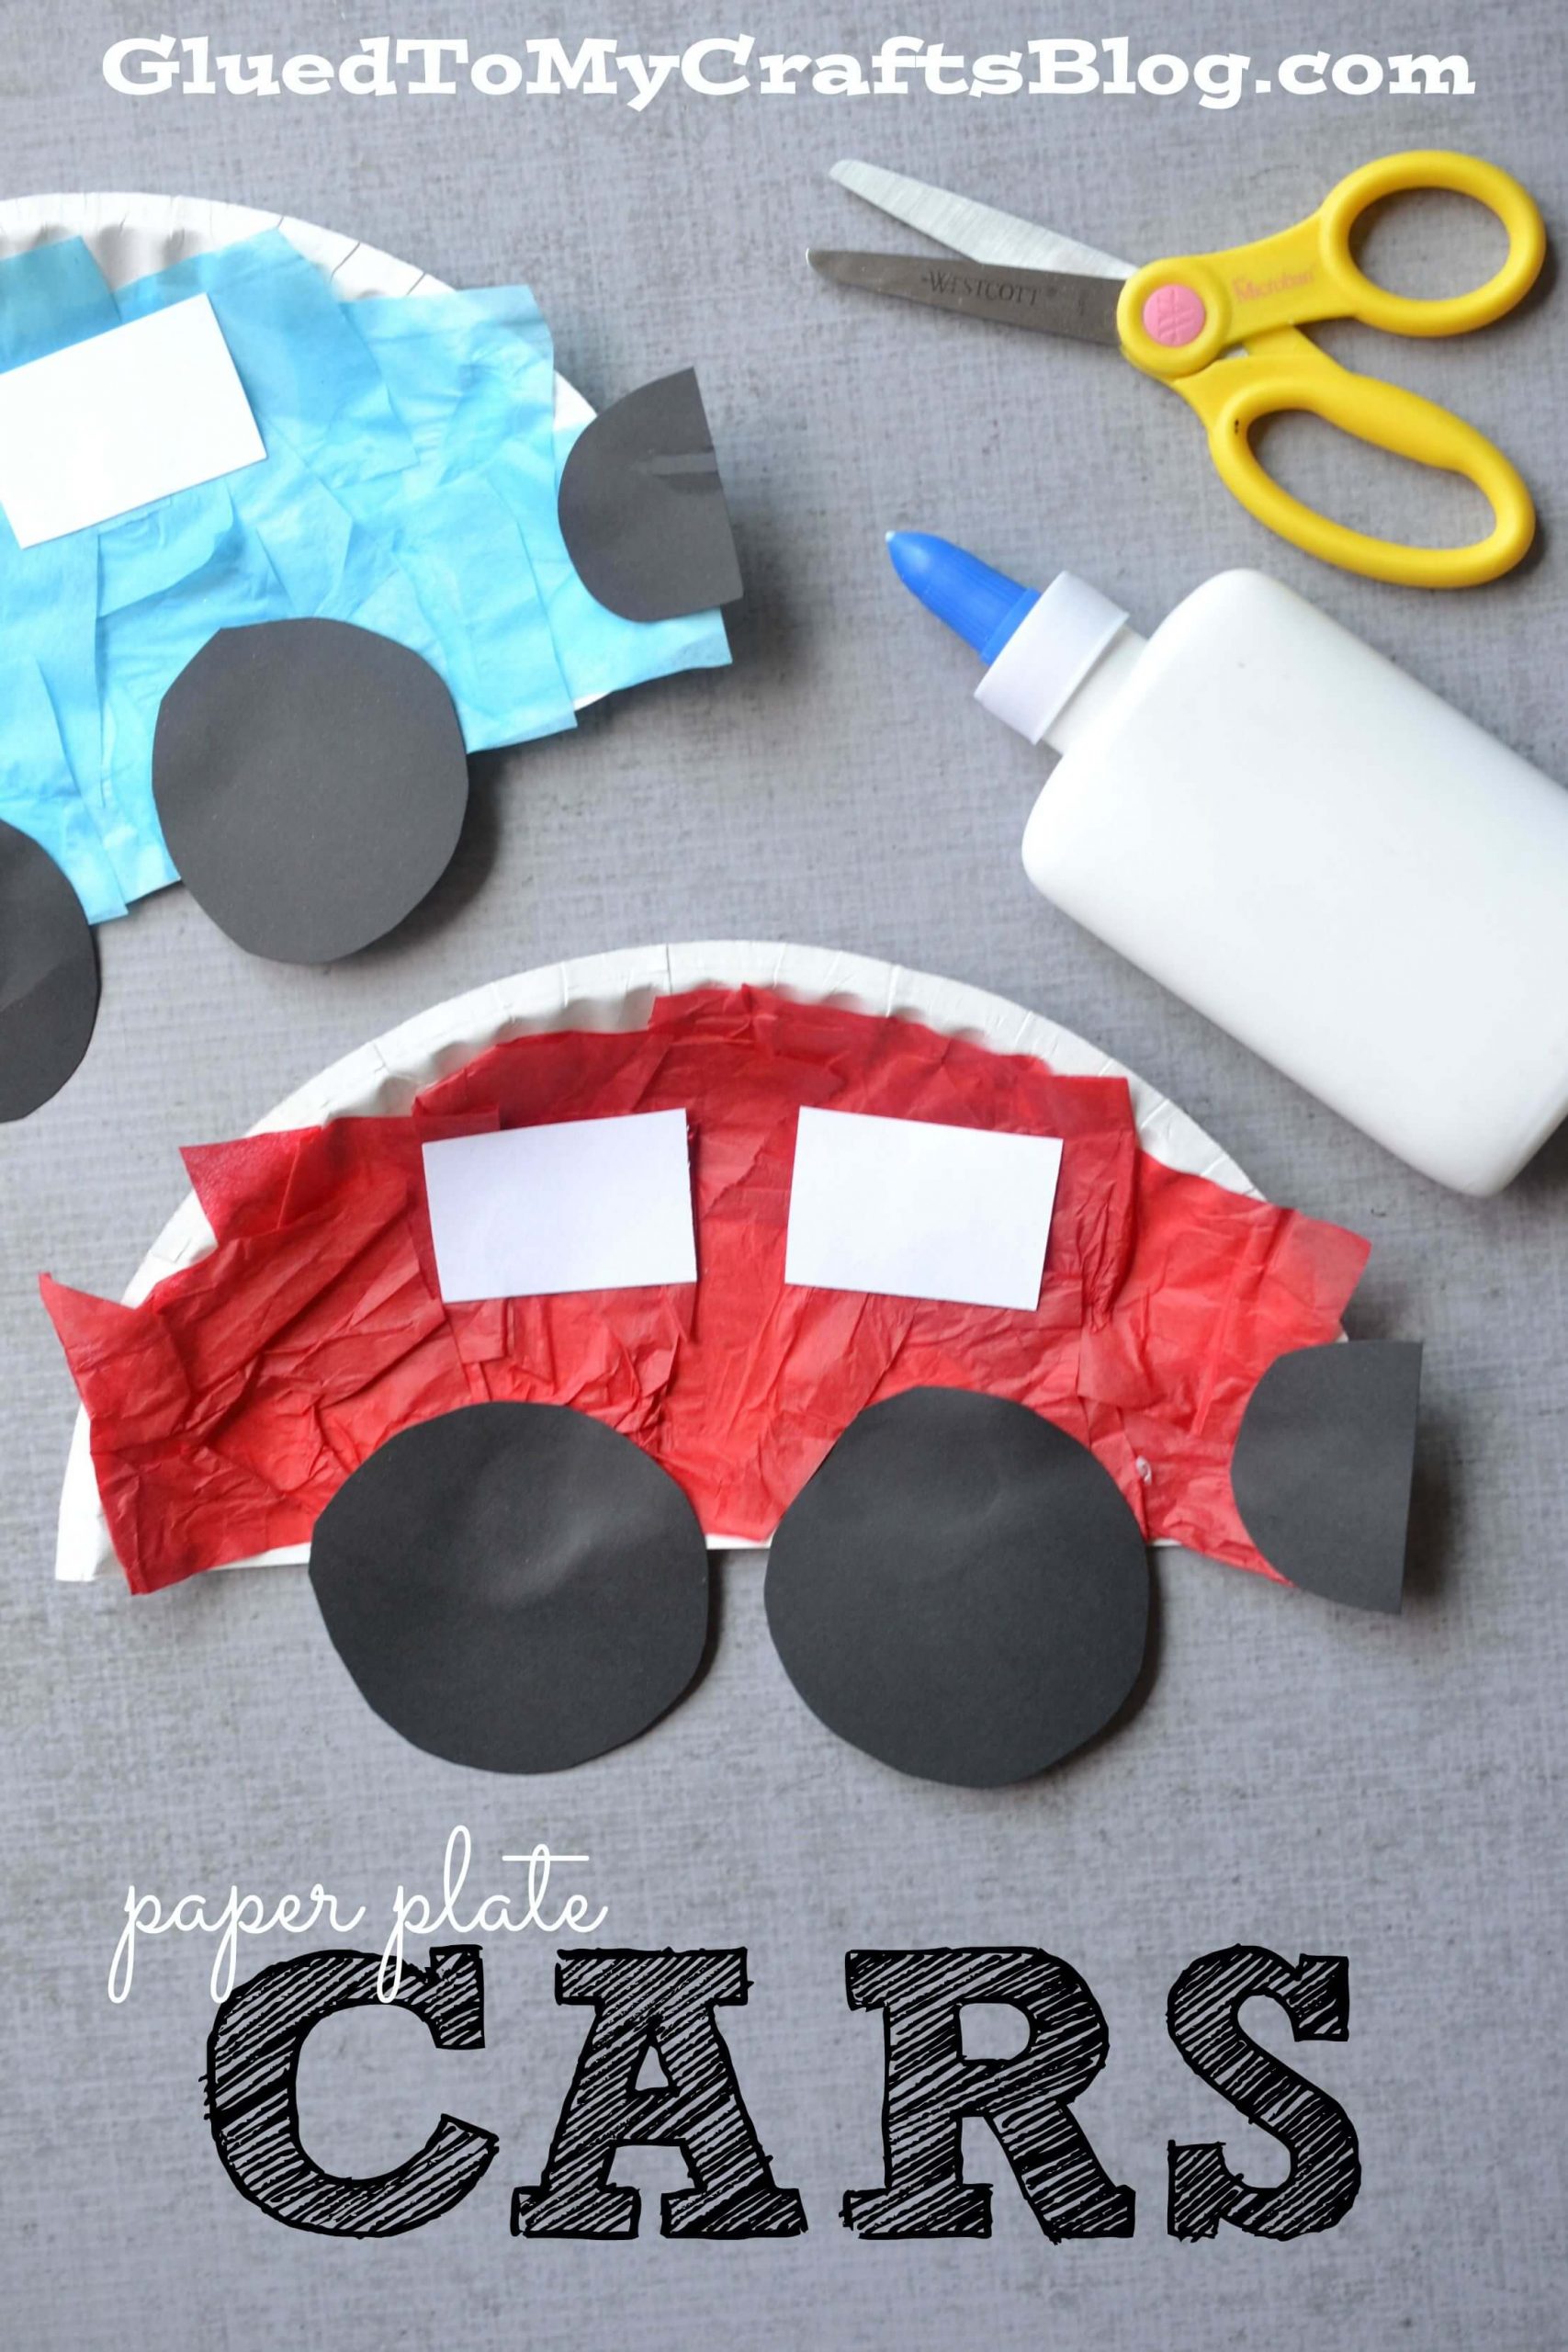 Amazing Paper Plate Cars Craft For Kids To MakeTransportation Art &amp; Craft Projects for Toddlers 